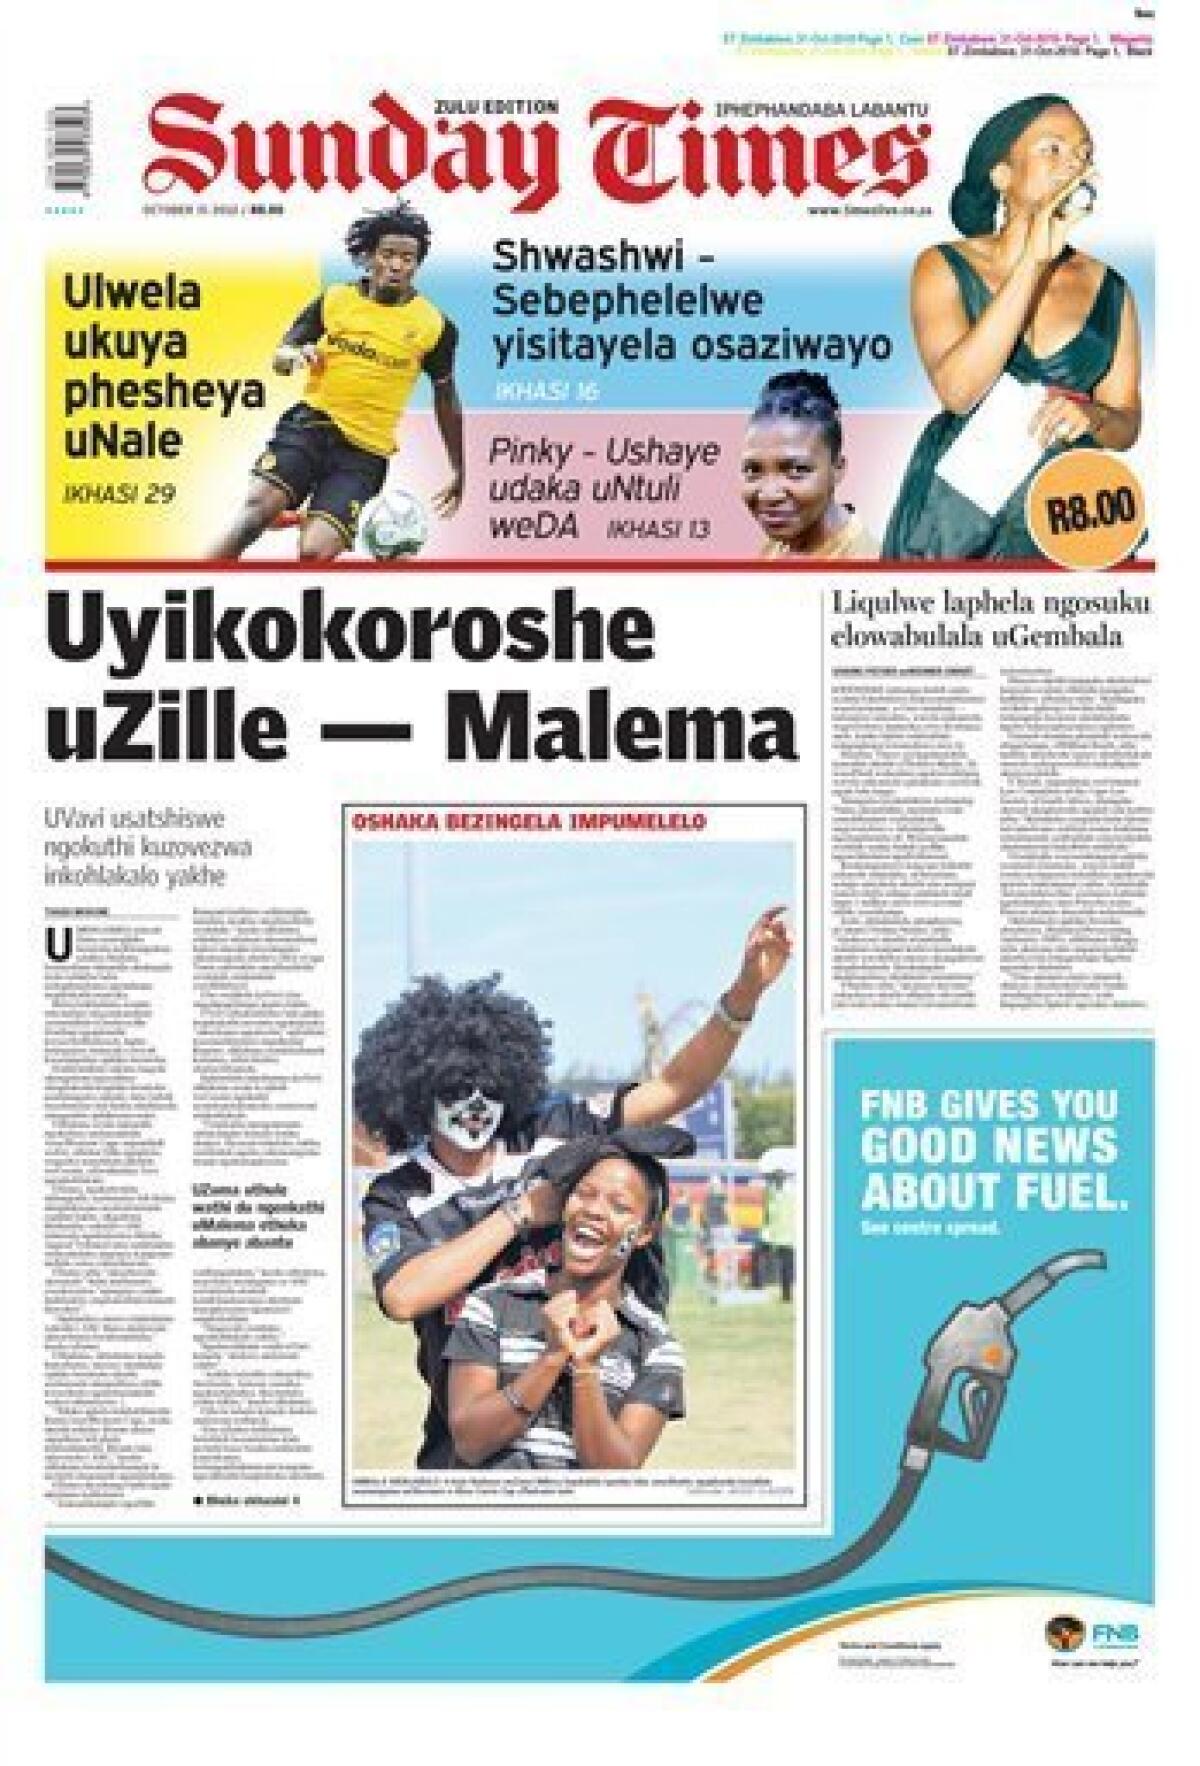 afrikaans articles to read 2022